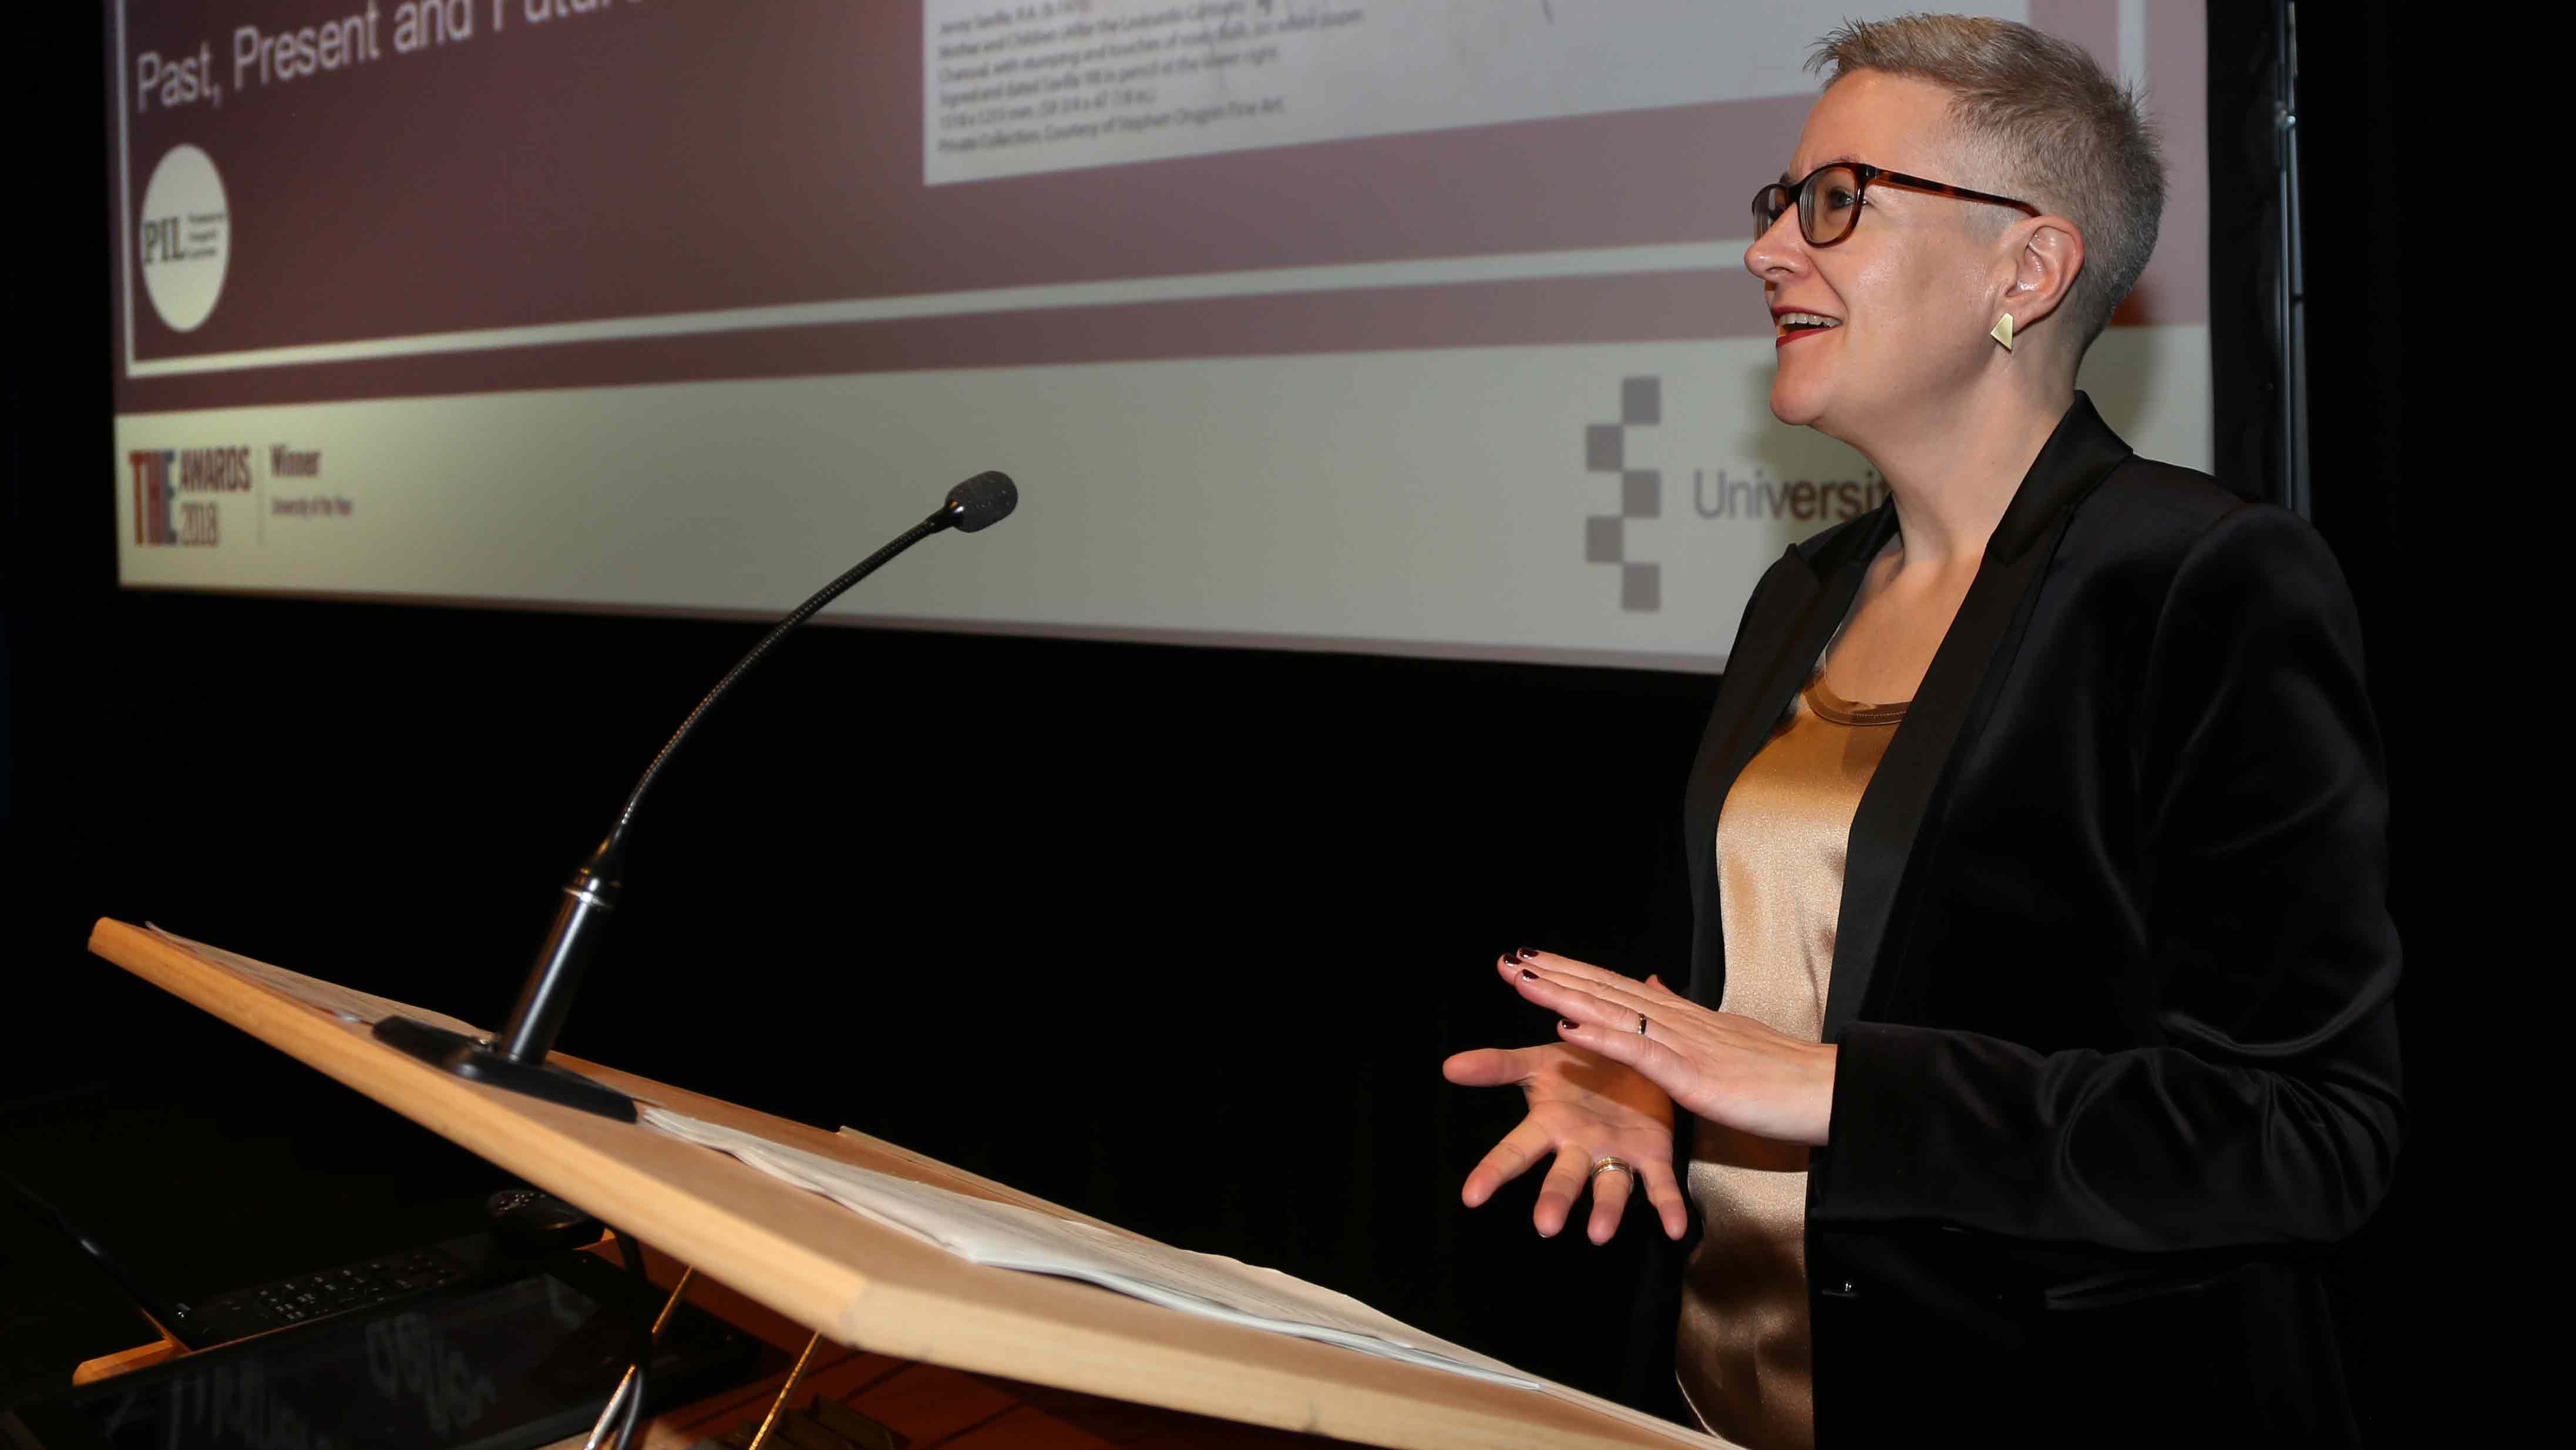 Professor Tracey Loughran, seen delivering a lecture, wearing a black jacket and dark-rimmed glasses